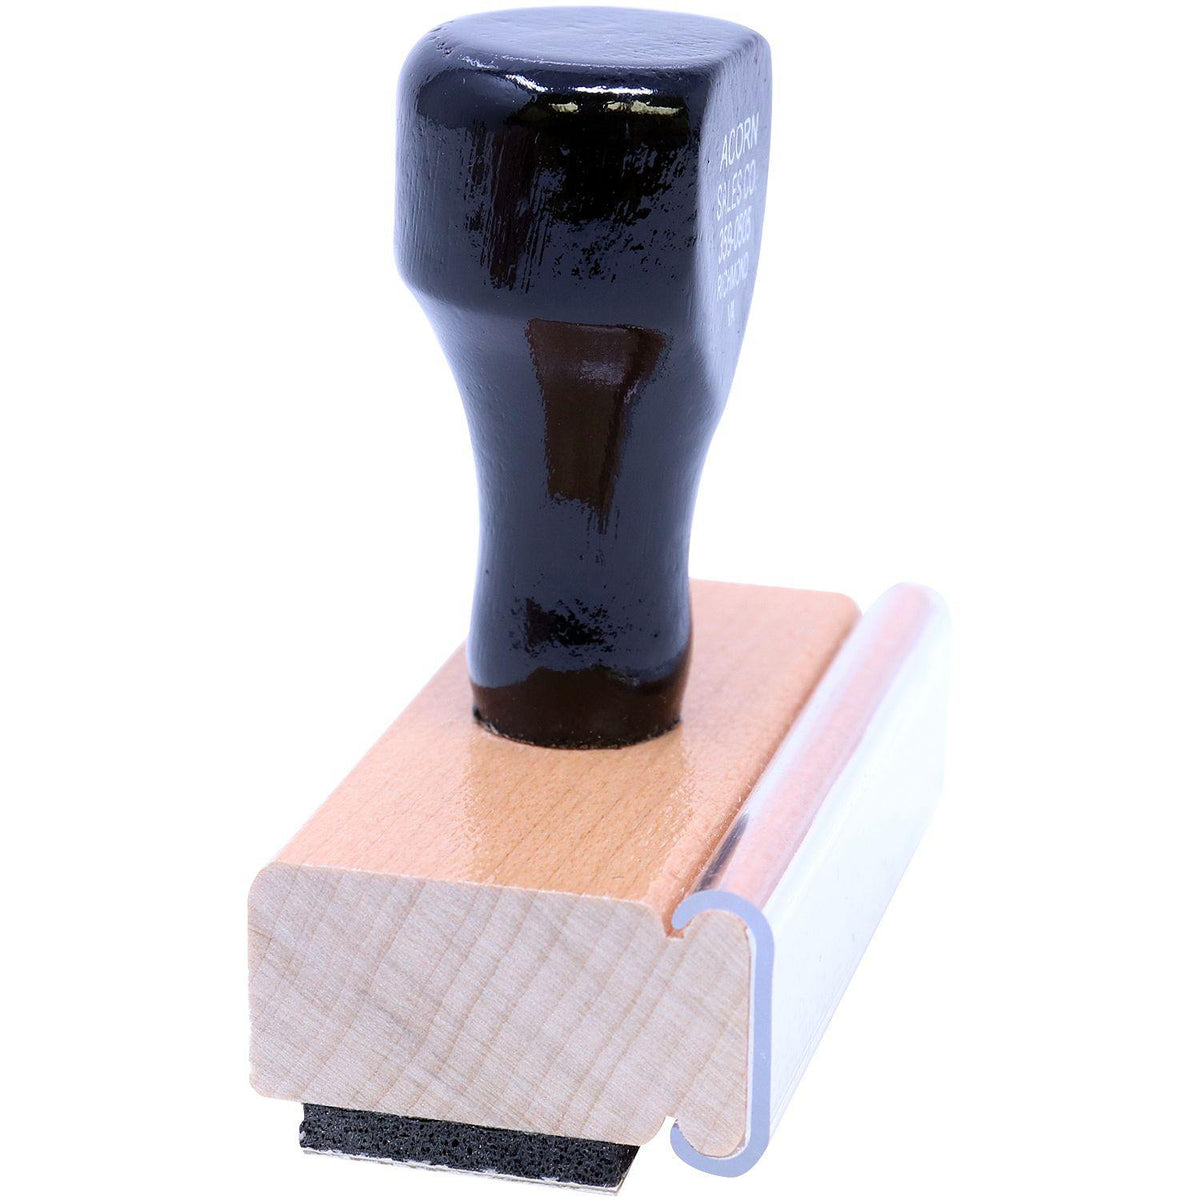 Side View of Large Narrow Posted Rubber Stamp at an Angle